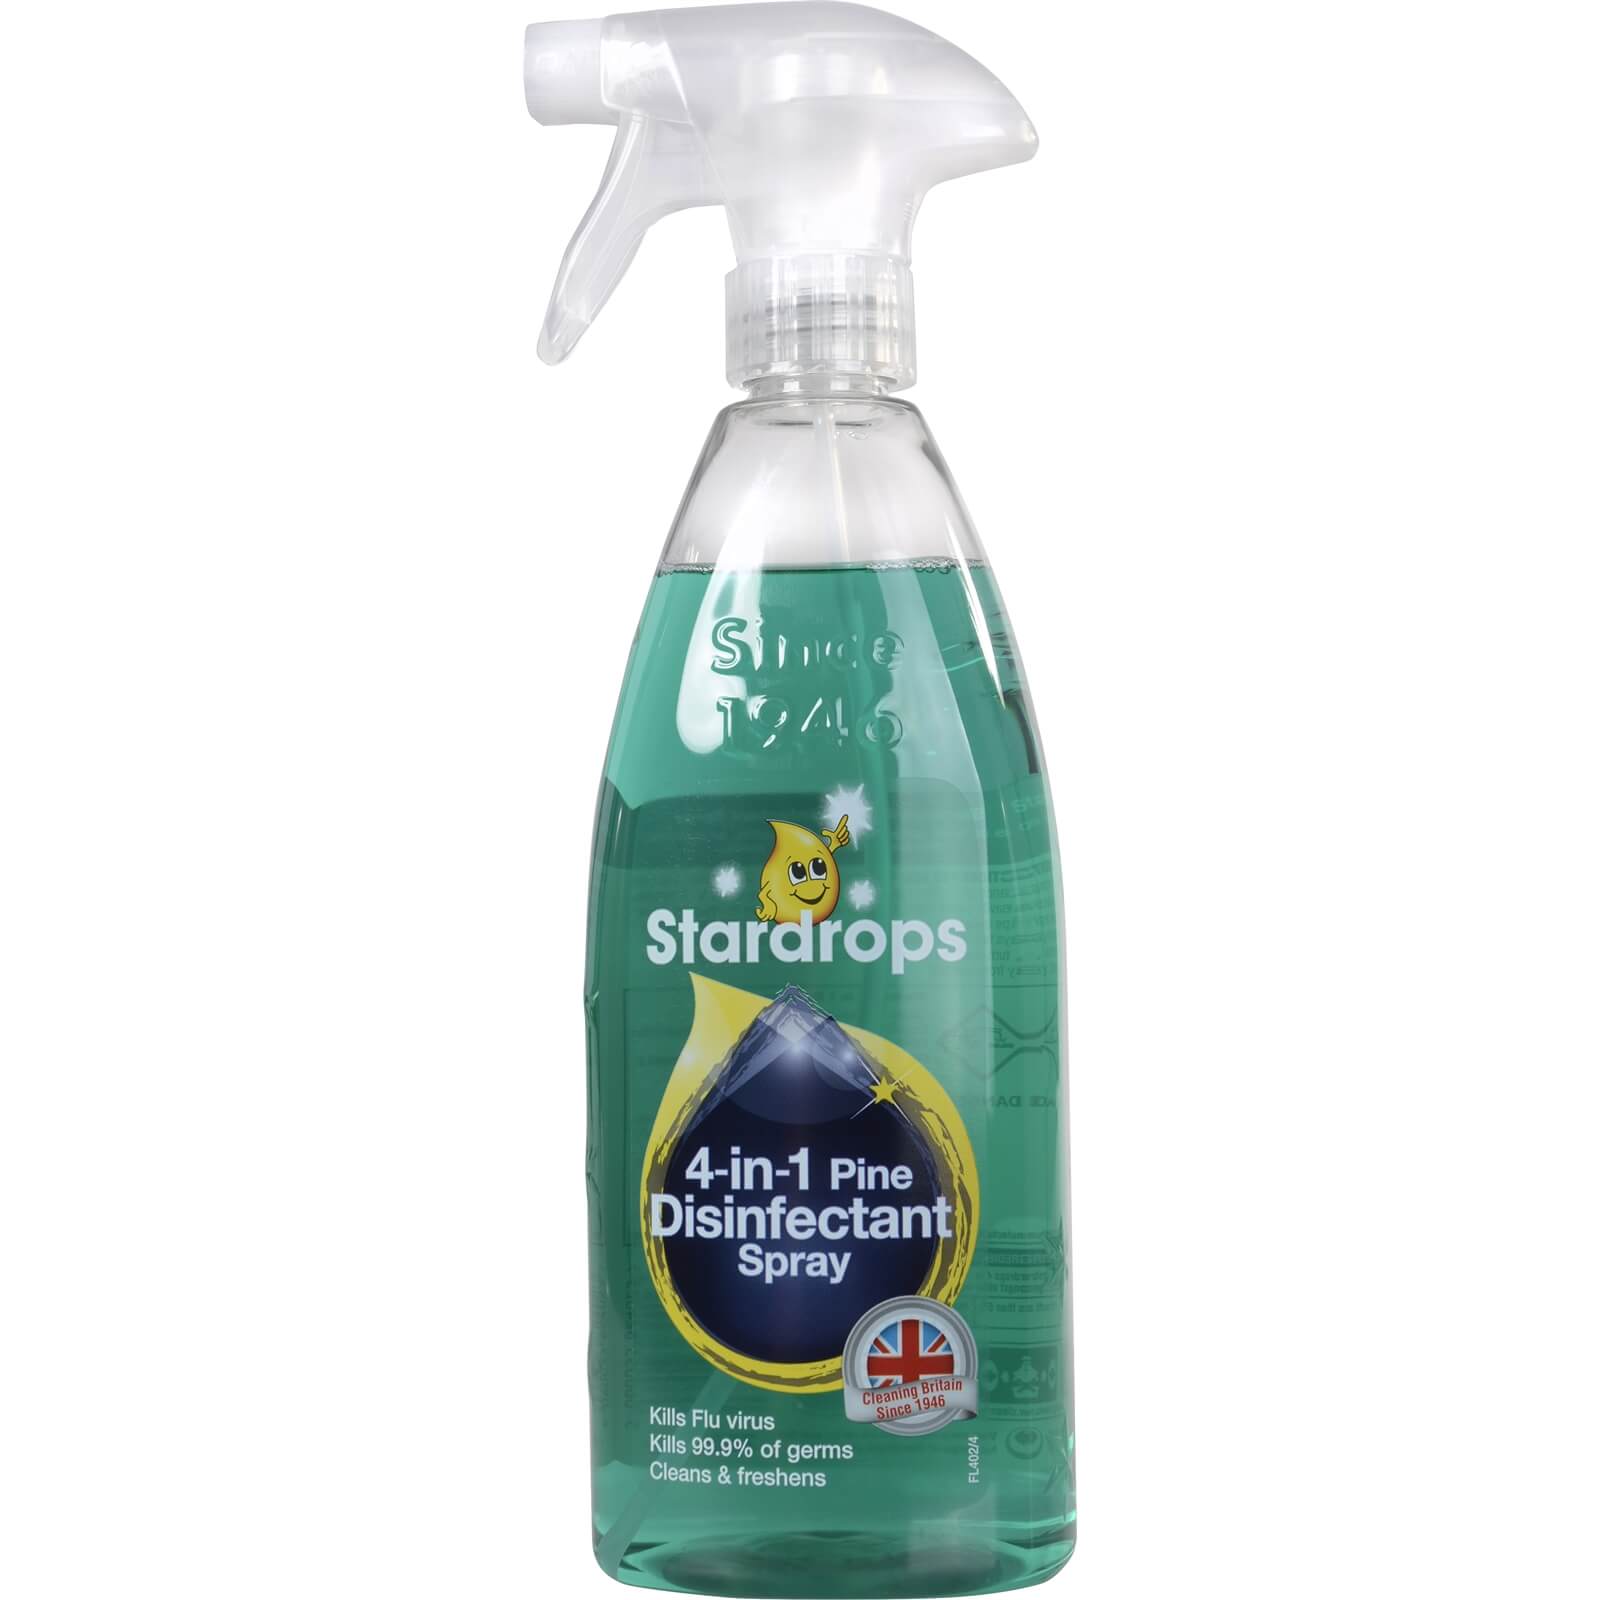 Stardrops 4in1 Pine Disinfectant Spray